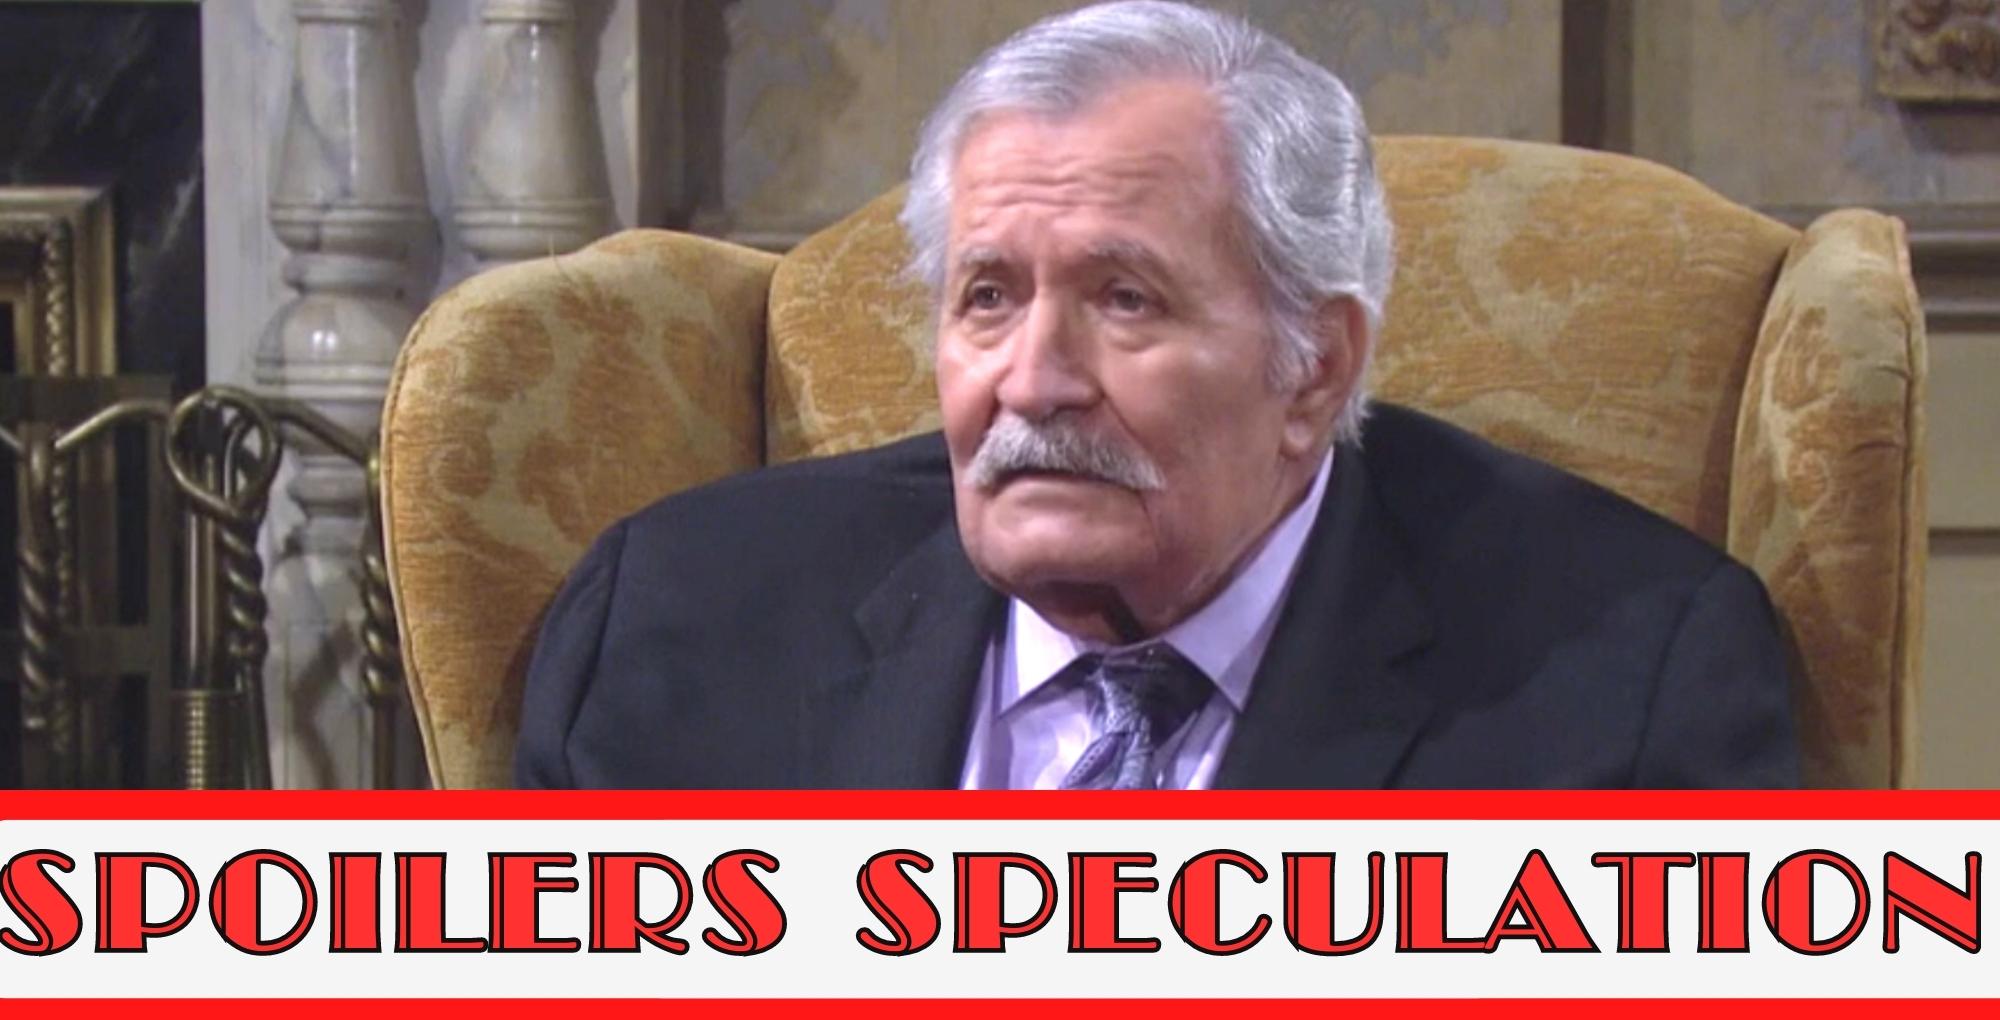 days spoilers speculation about who will be ruthless like victor kiriakis.